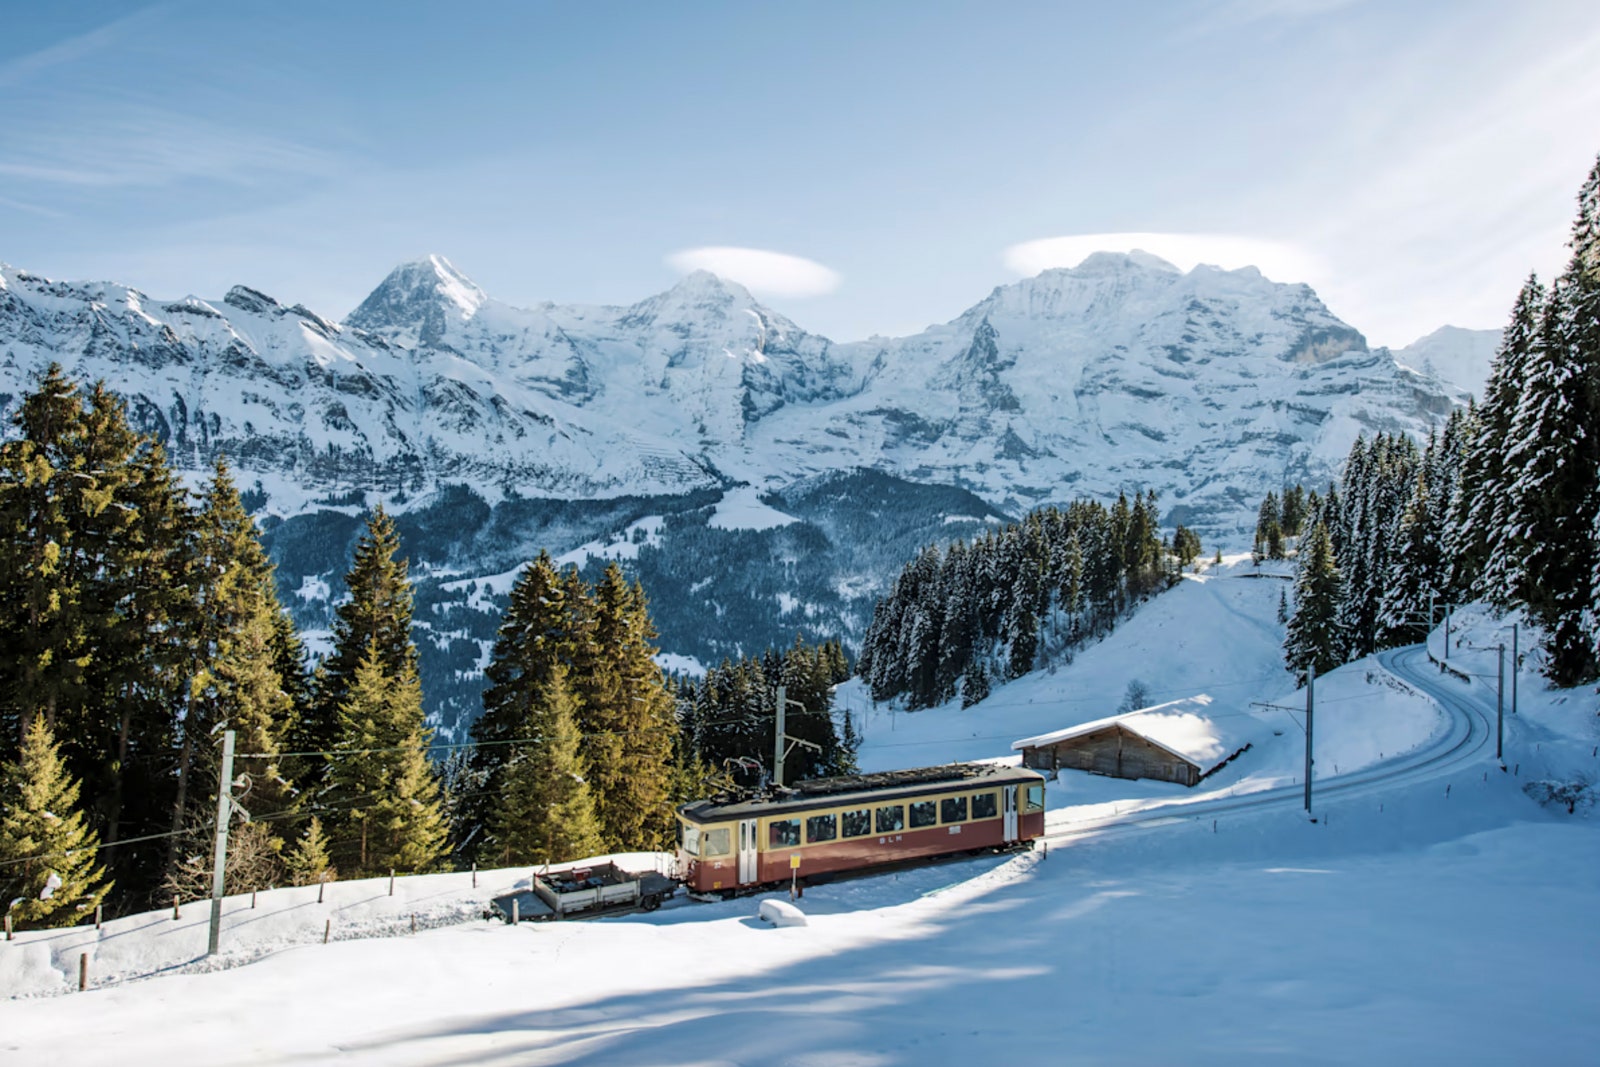 5 Scenic (and Cozy) Train Trips to Book This Winter